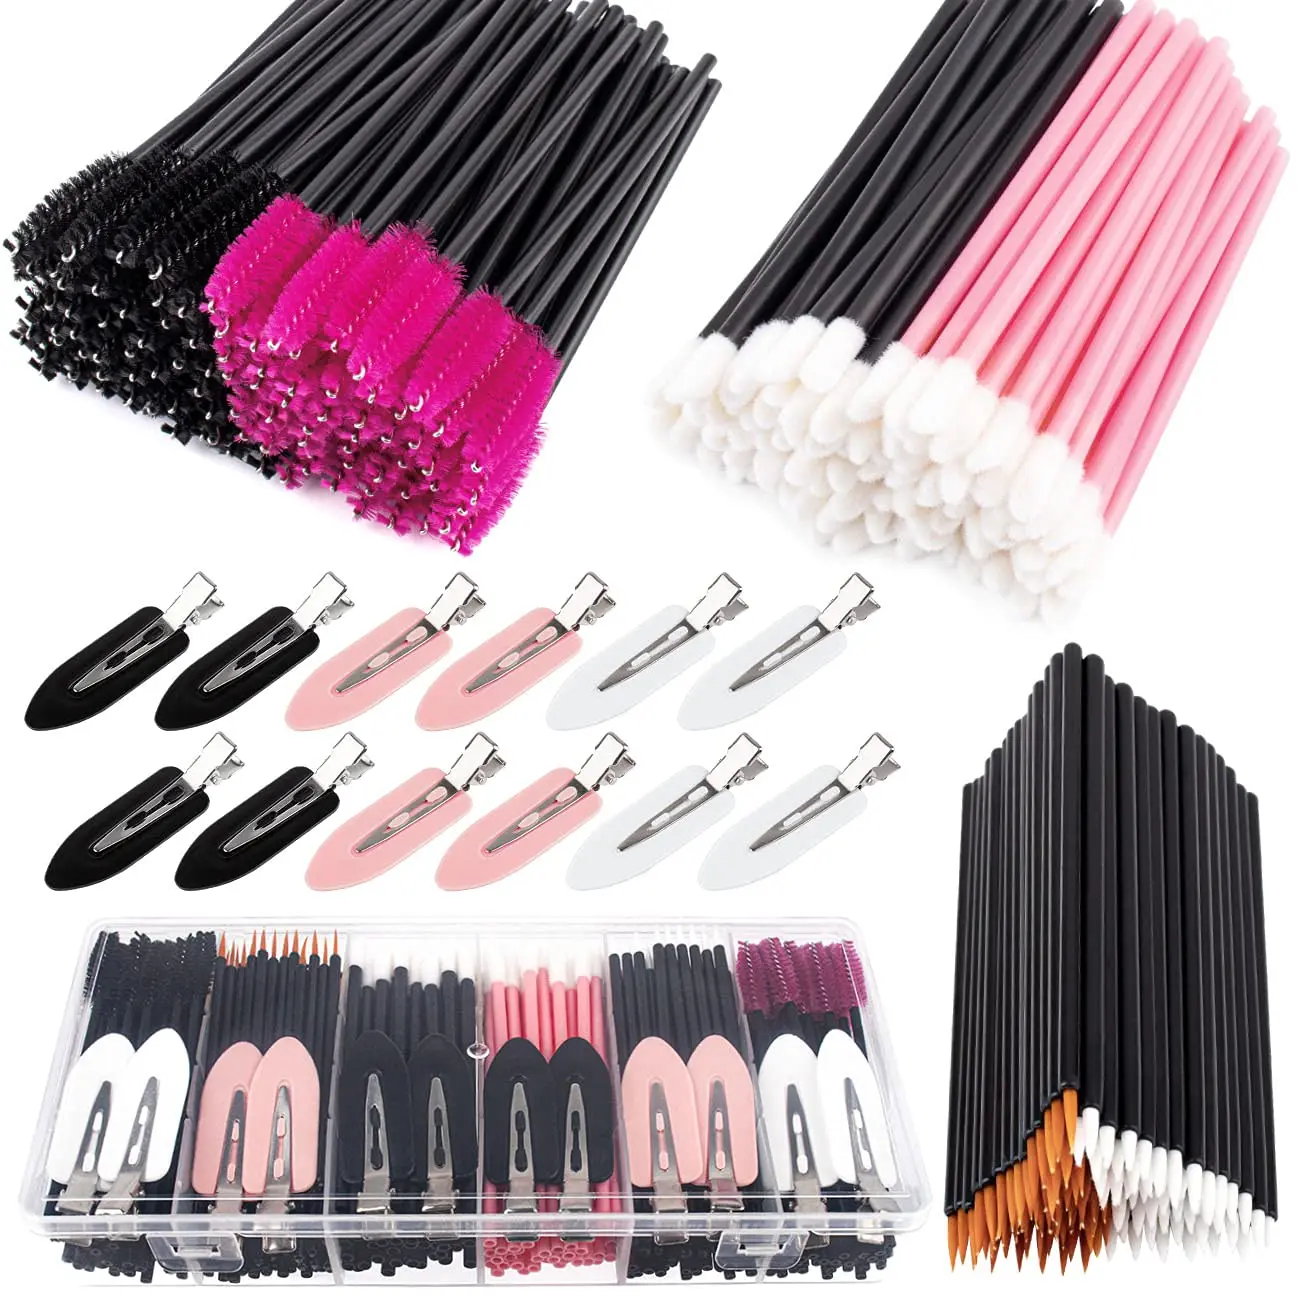 

283 PCS Disposable Makeup Tool Applicators Kit with Mixing Palette Lip Brushes Hair Clips Powder Puffs for Face with Storage Box